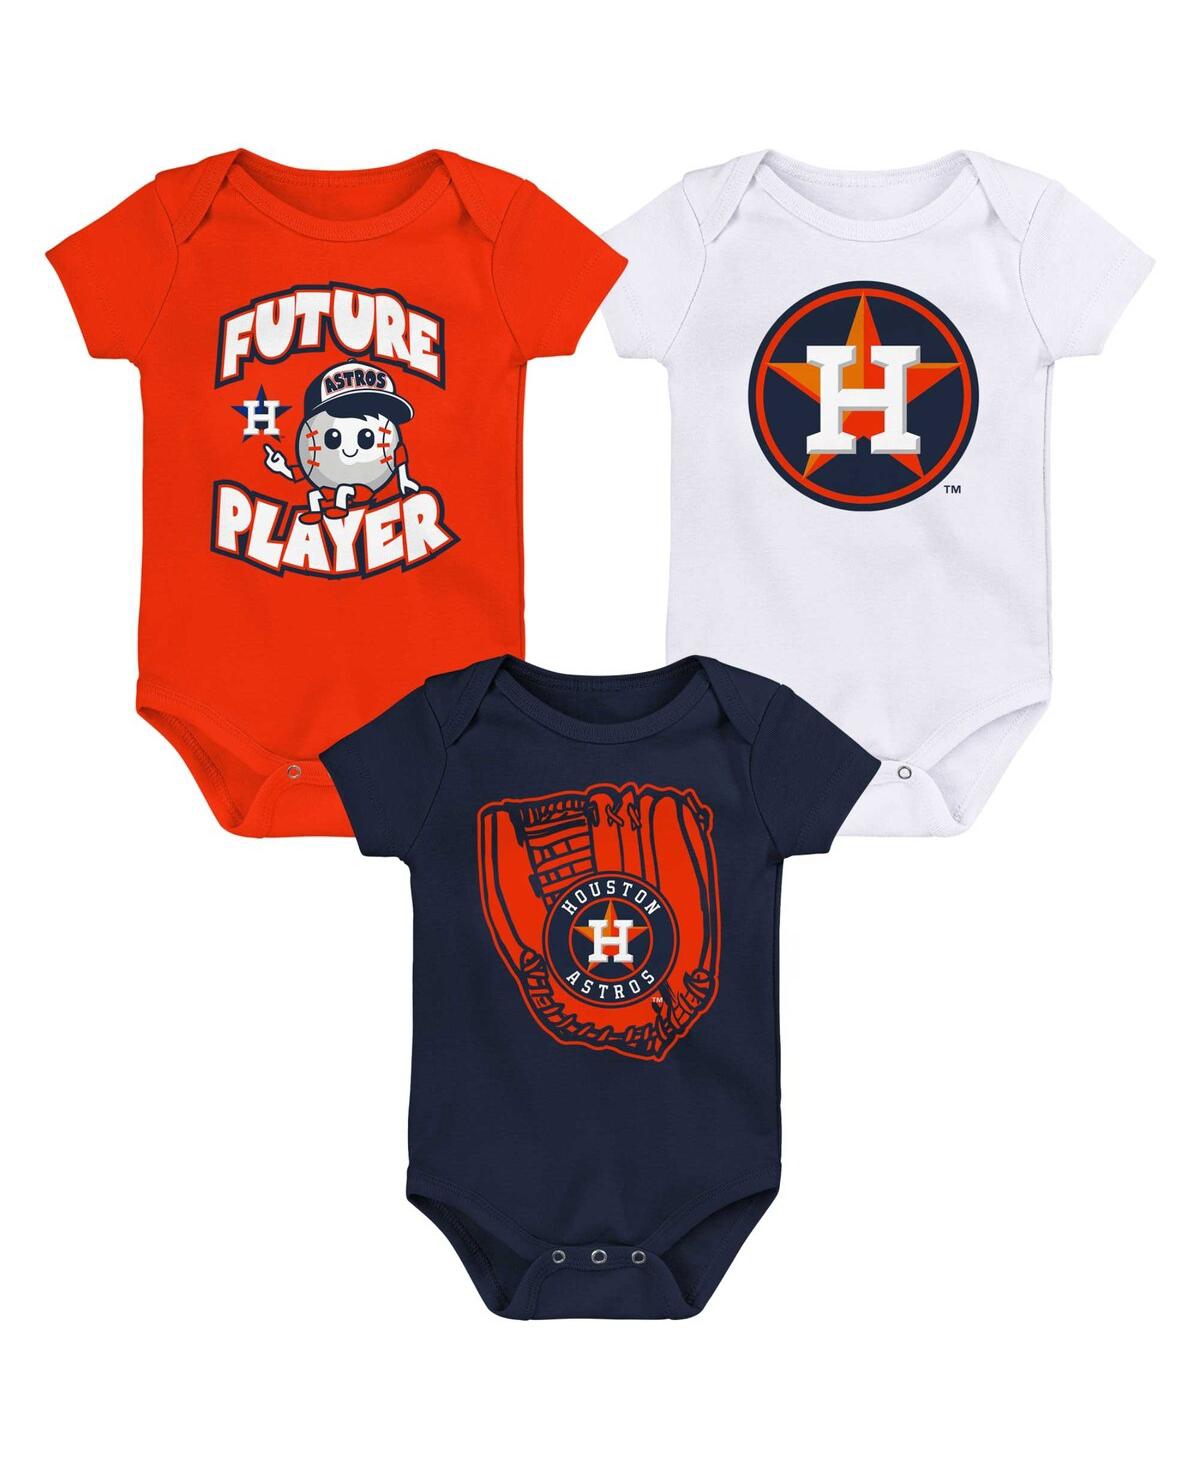 Shop Outerstuff Newborn And Infant Boys And Girls Orange, Navy, White Houston Astros Minor League Player Three-pack  In Orange,navy,white